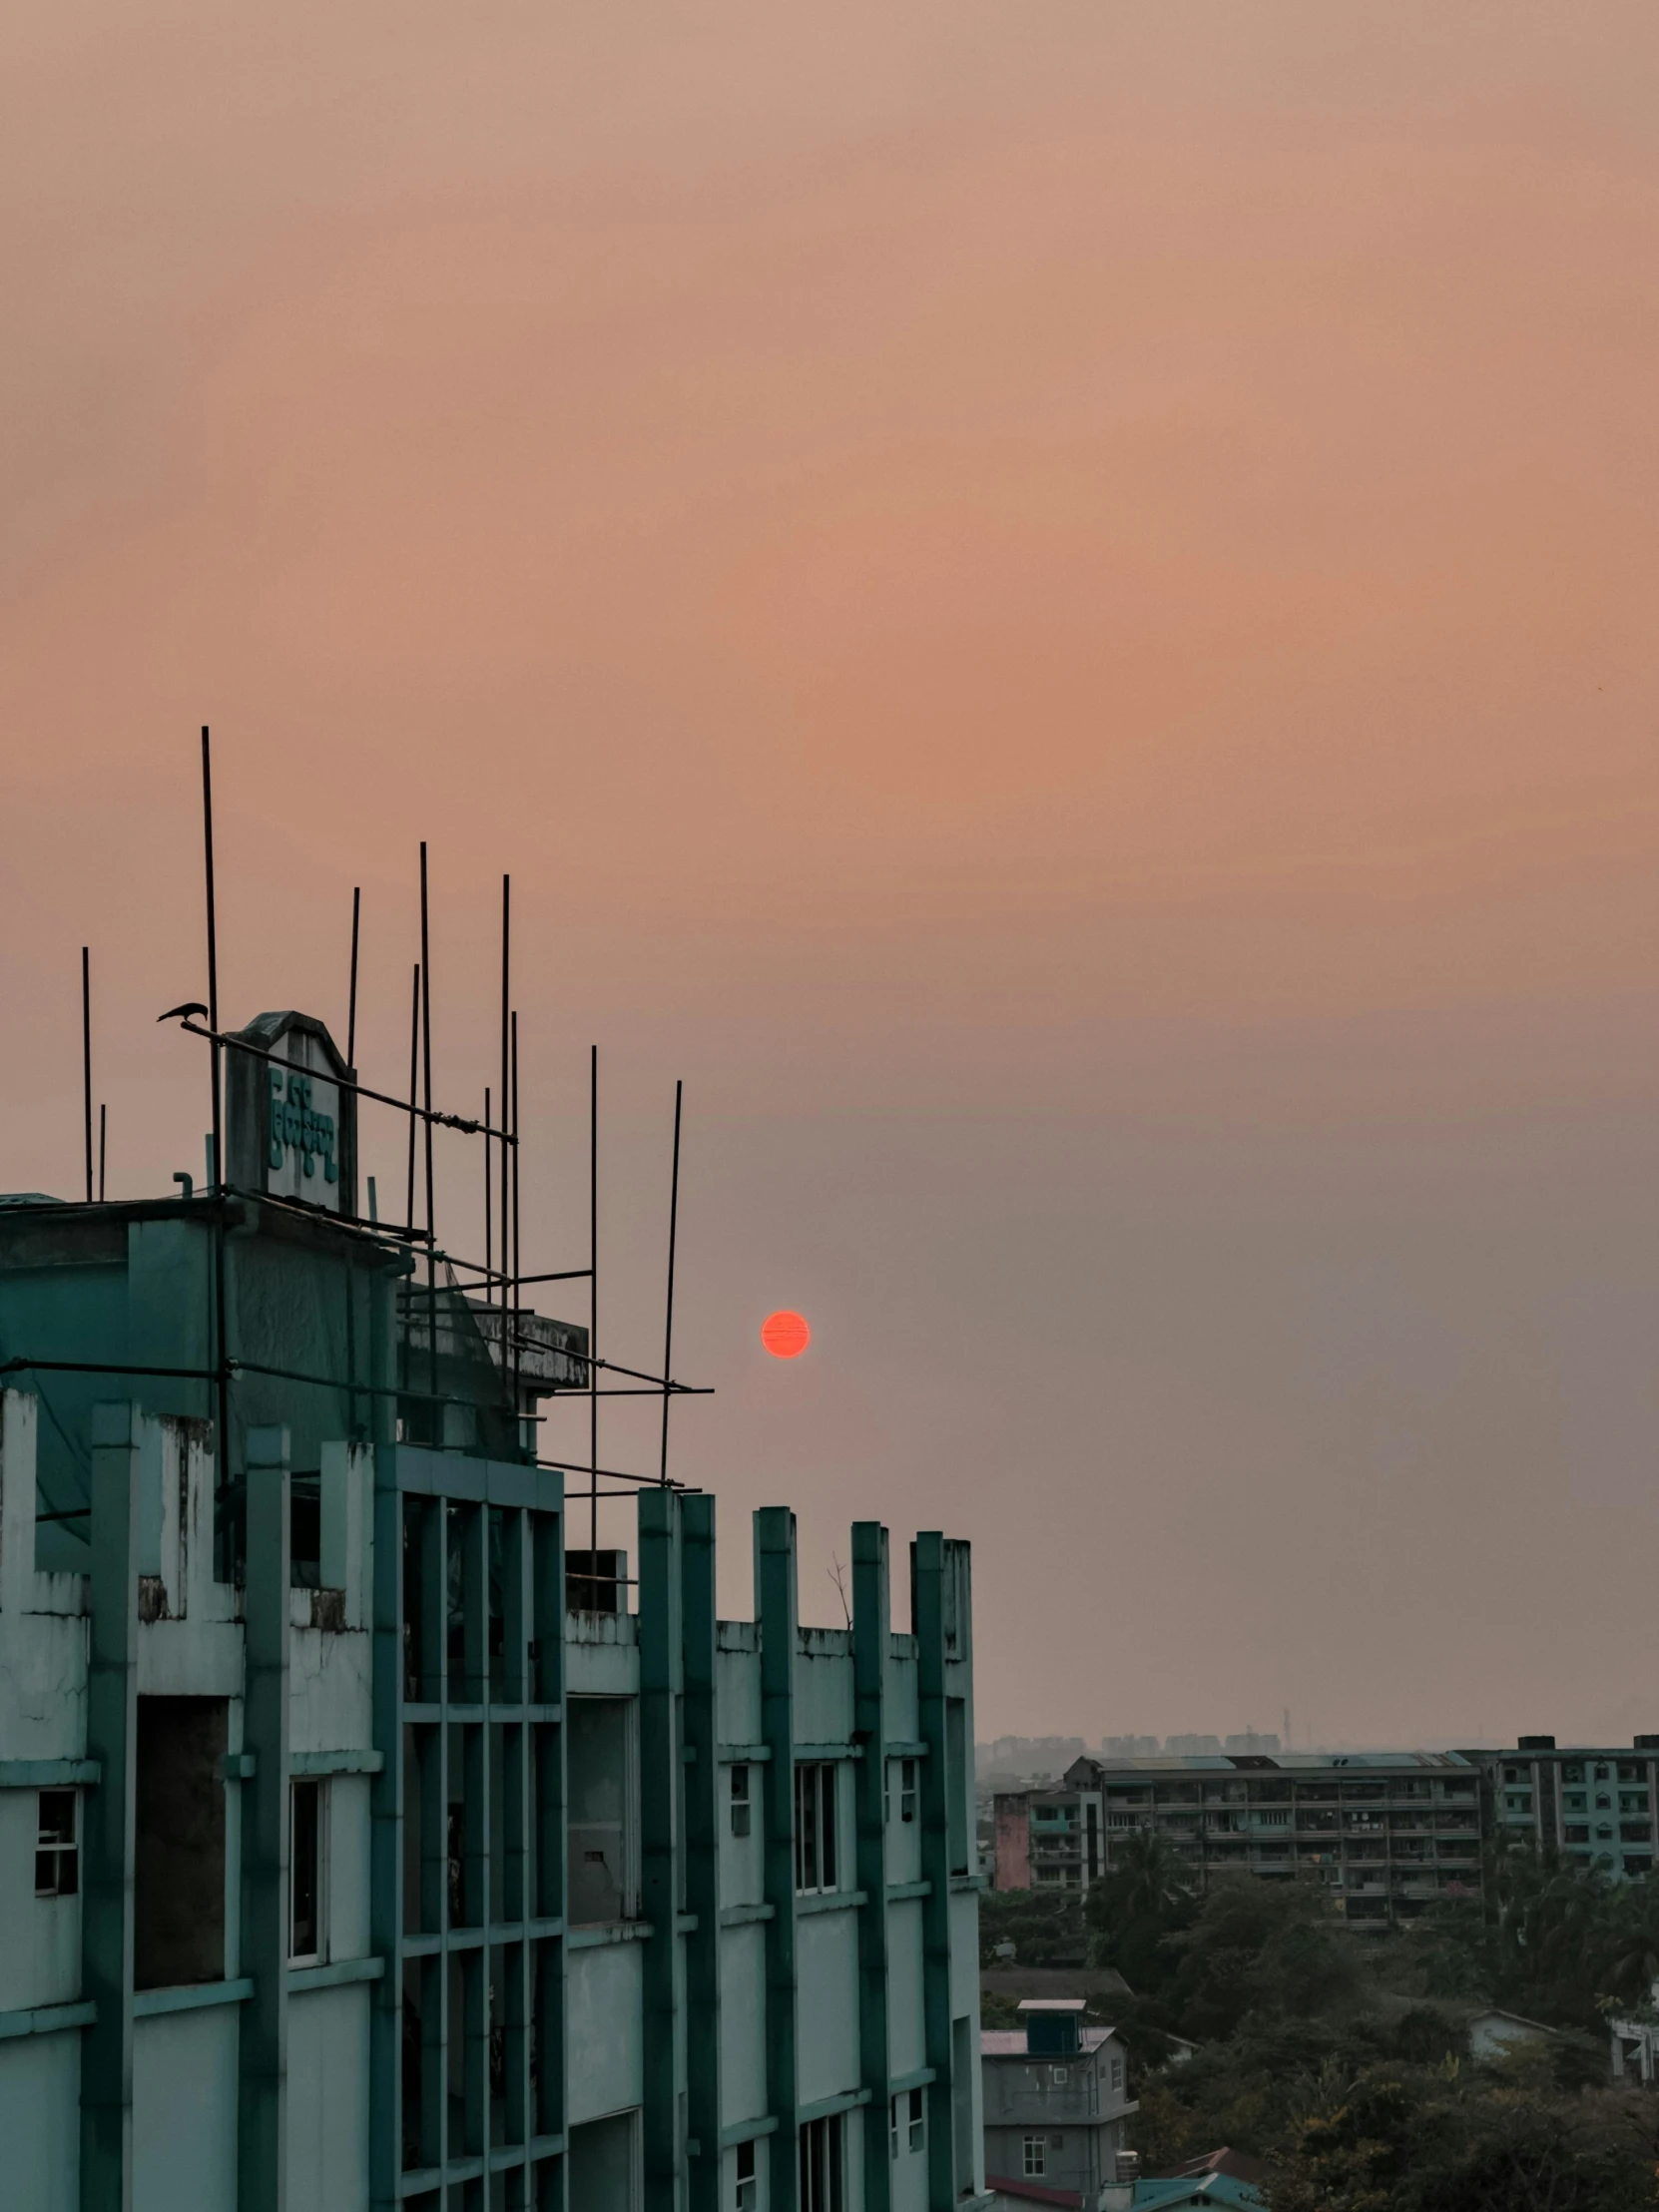 view from roof of buildings of sunset and the moon in the sky